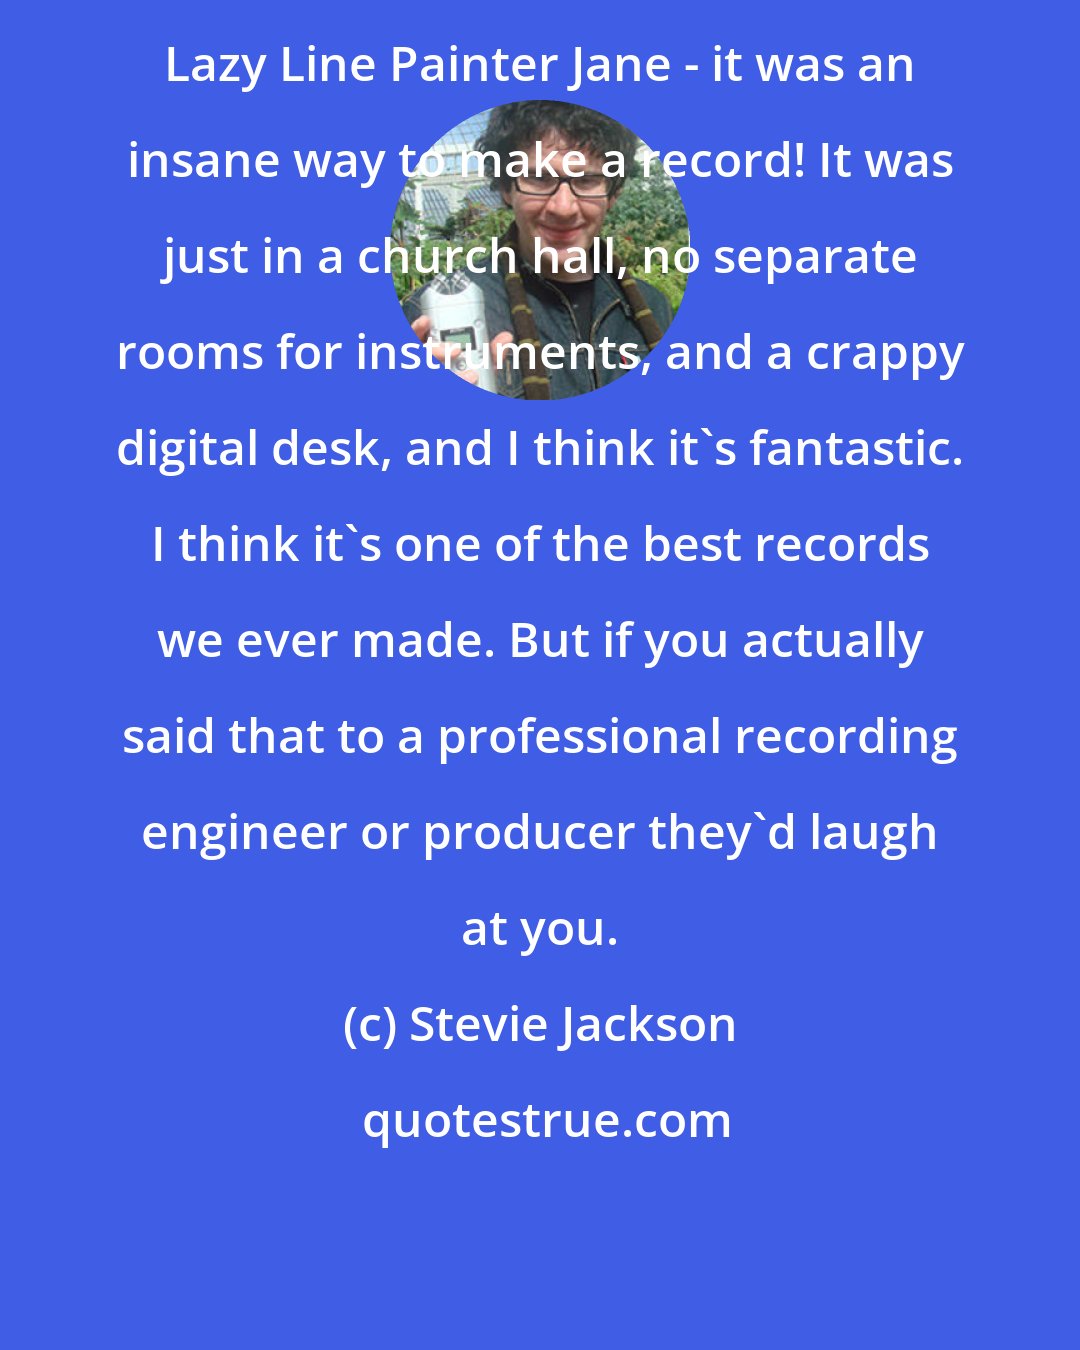 Stevie Jackson: Lazy Line Painter Jane - it was an insane way to make a record! It was just in a church hall, no separate rooms for instruments, and a crappy digital desk, and I think it's fantastic. I think it's one of the best records we ever made. But if you actually said that to a professional recording engineer or producer they'd laugh at you.